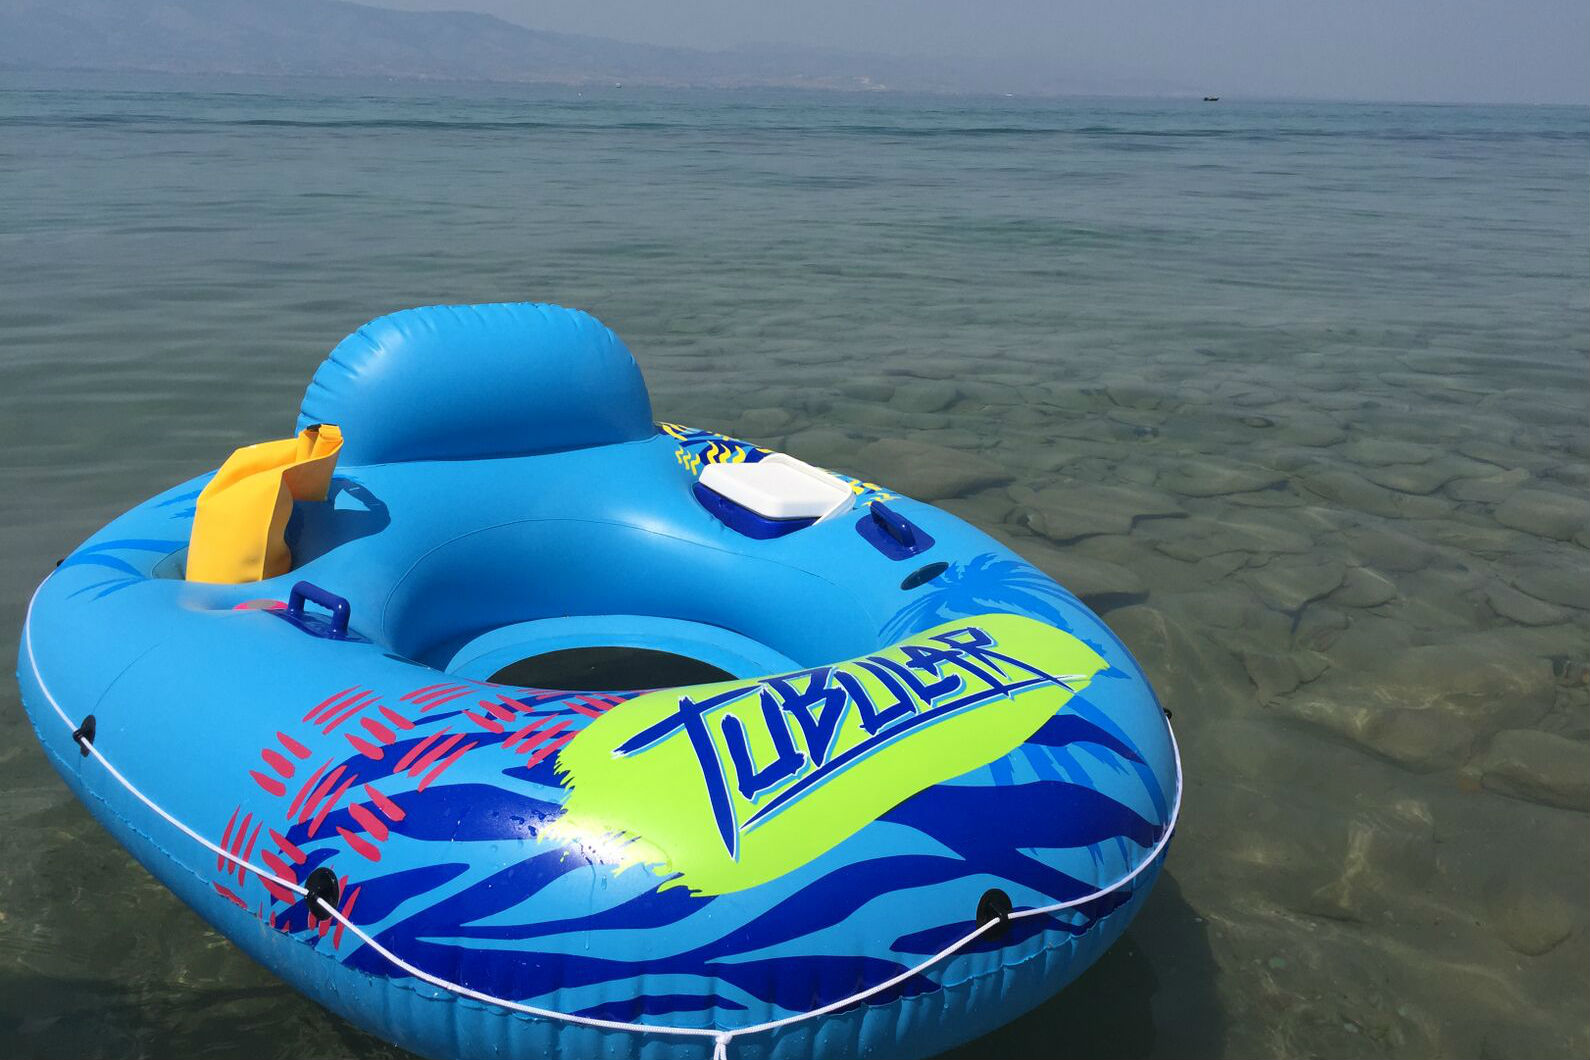 Tubular is the most high-tech float tube ever